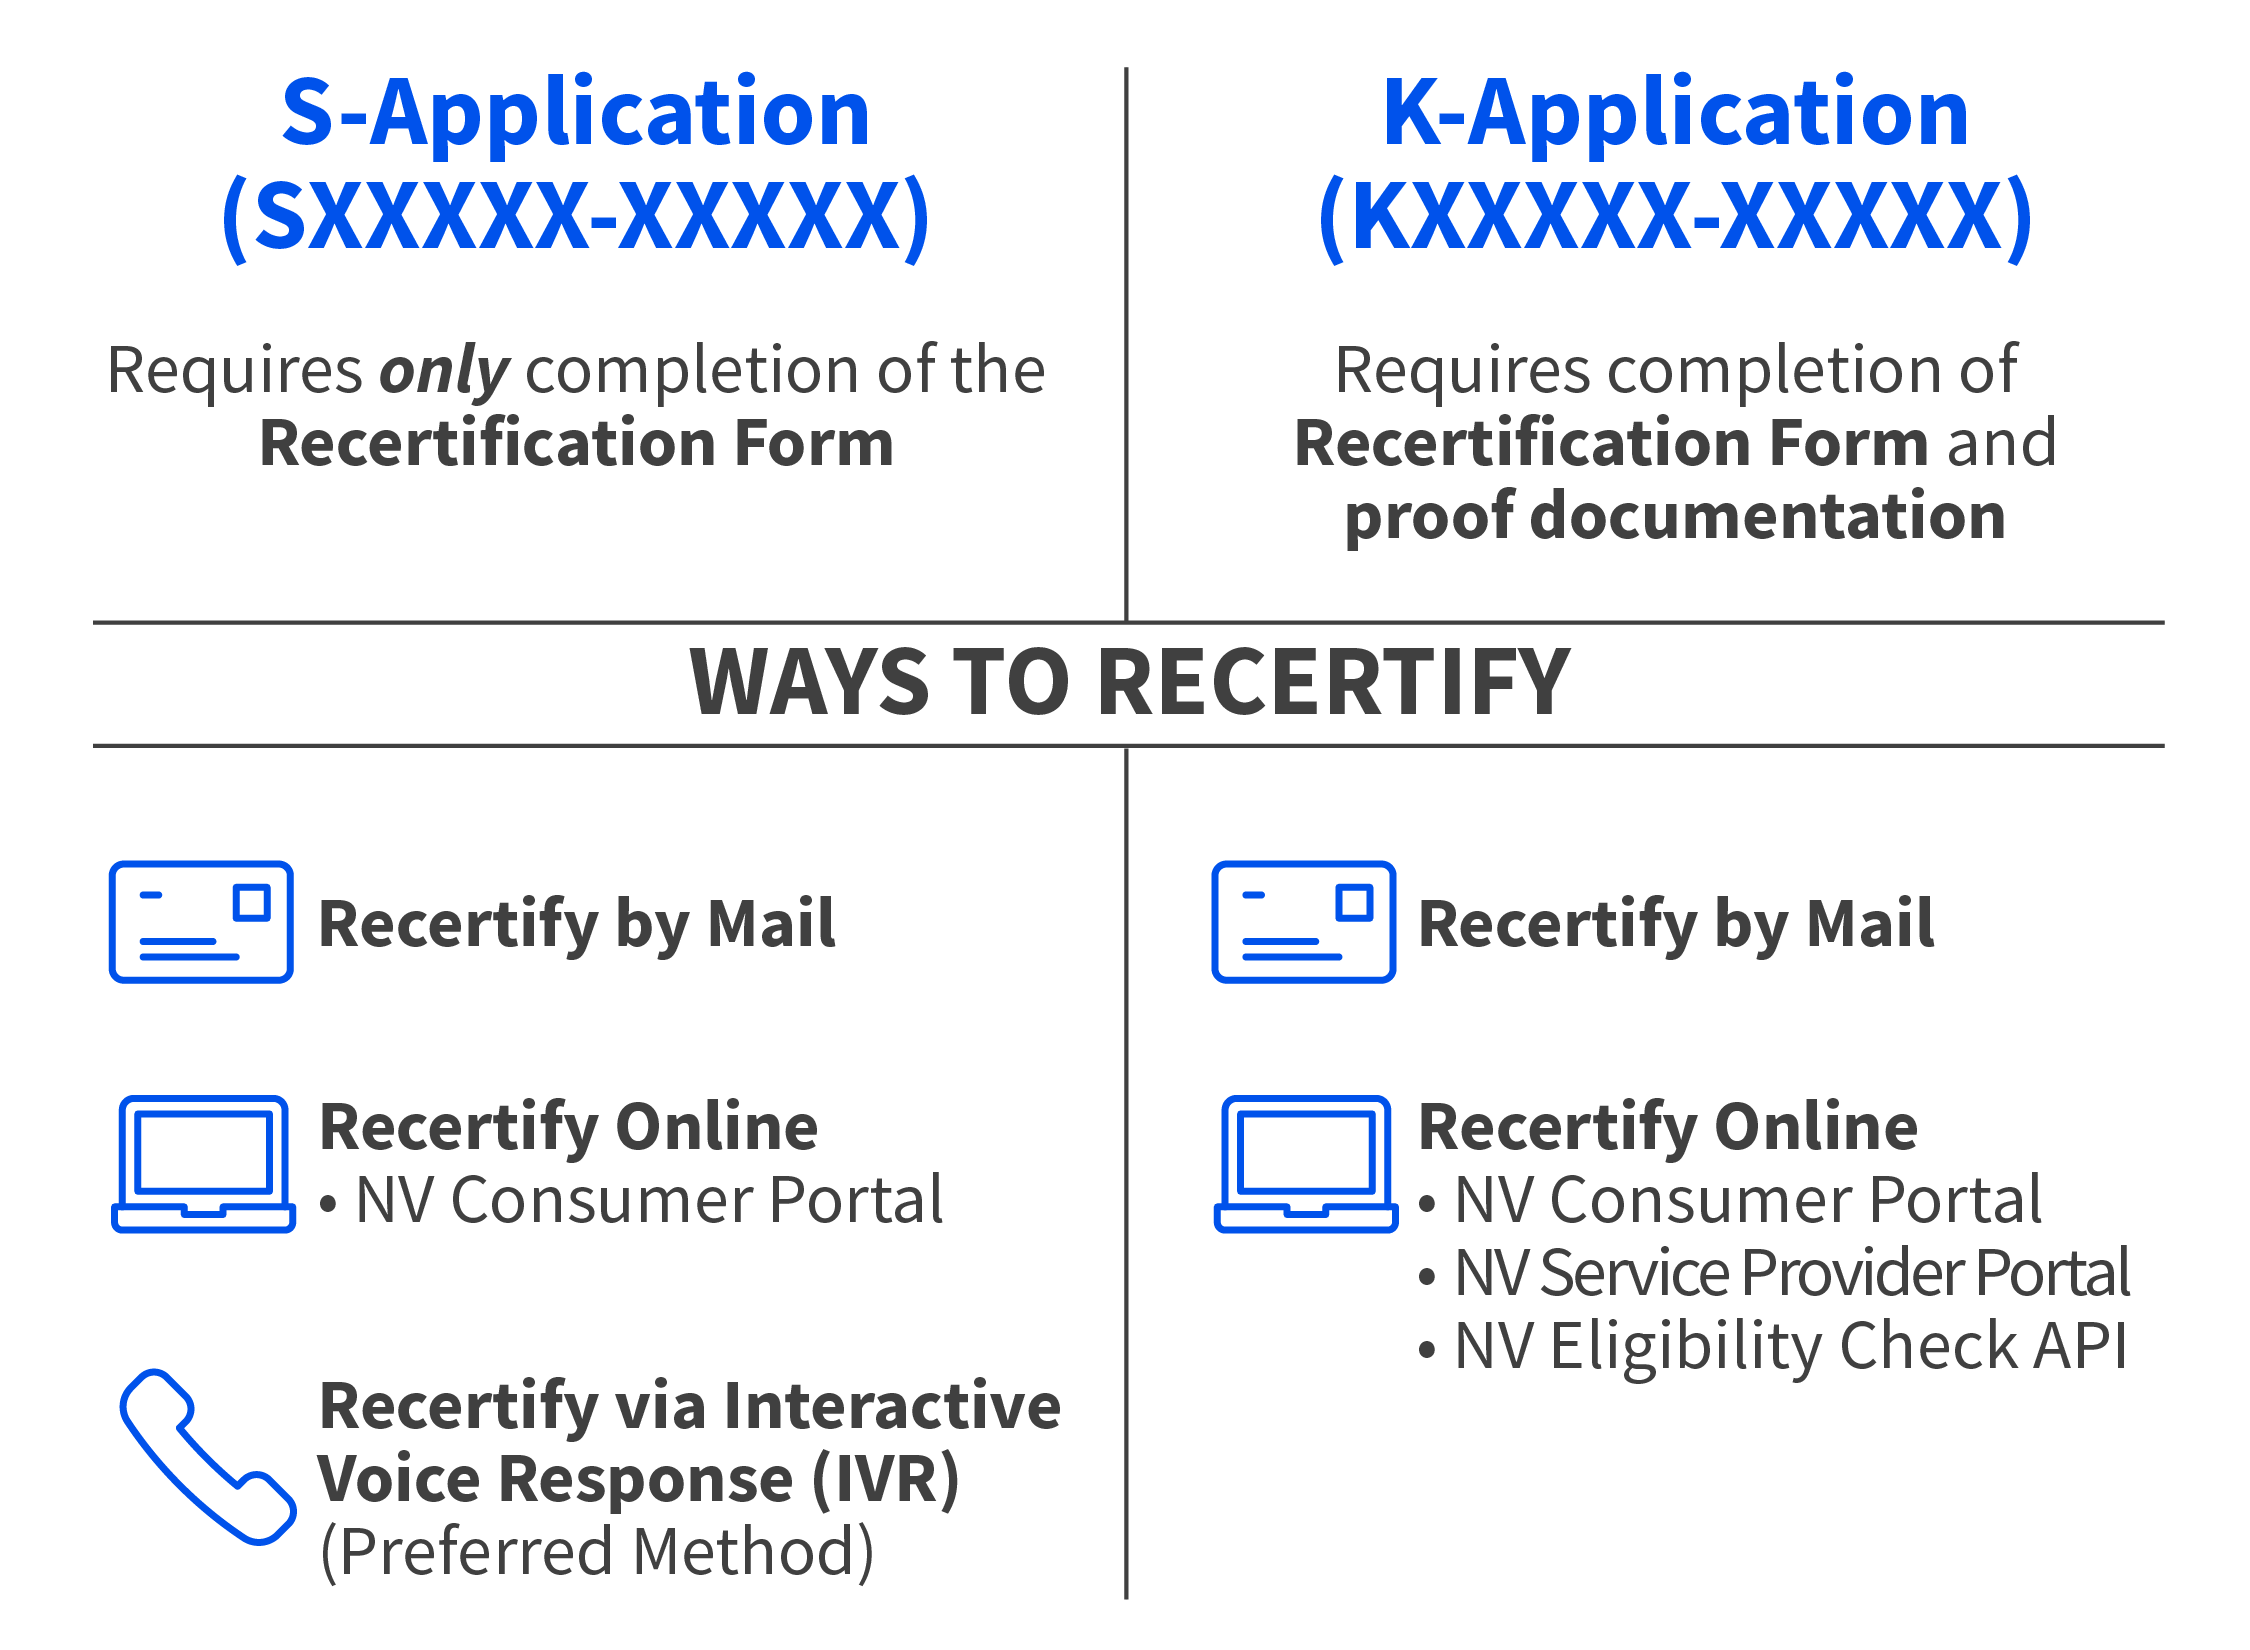 ACP recertification application type chart showing S-applications and K-applications with the different methods to recertify